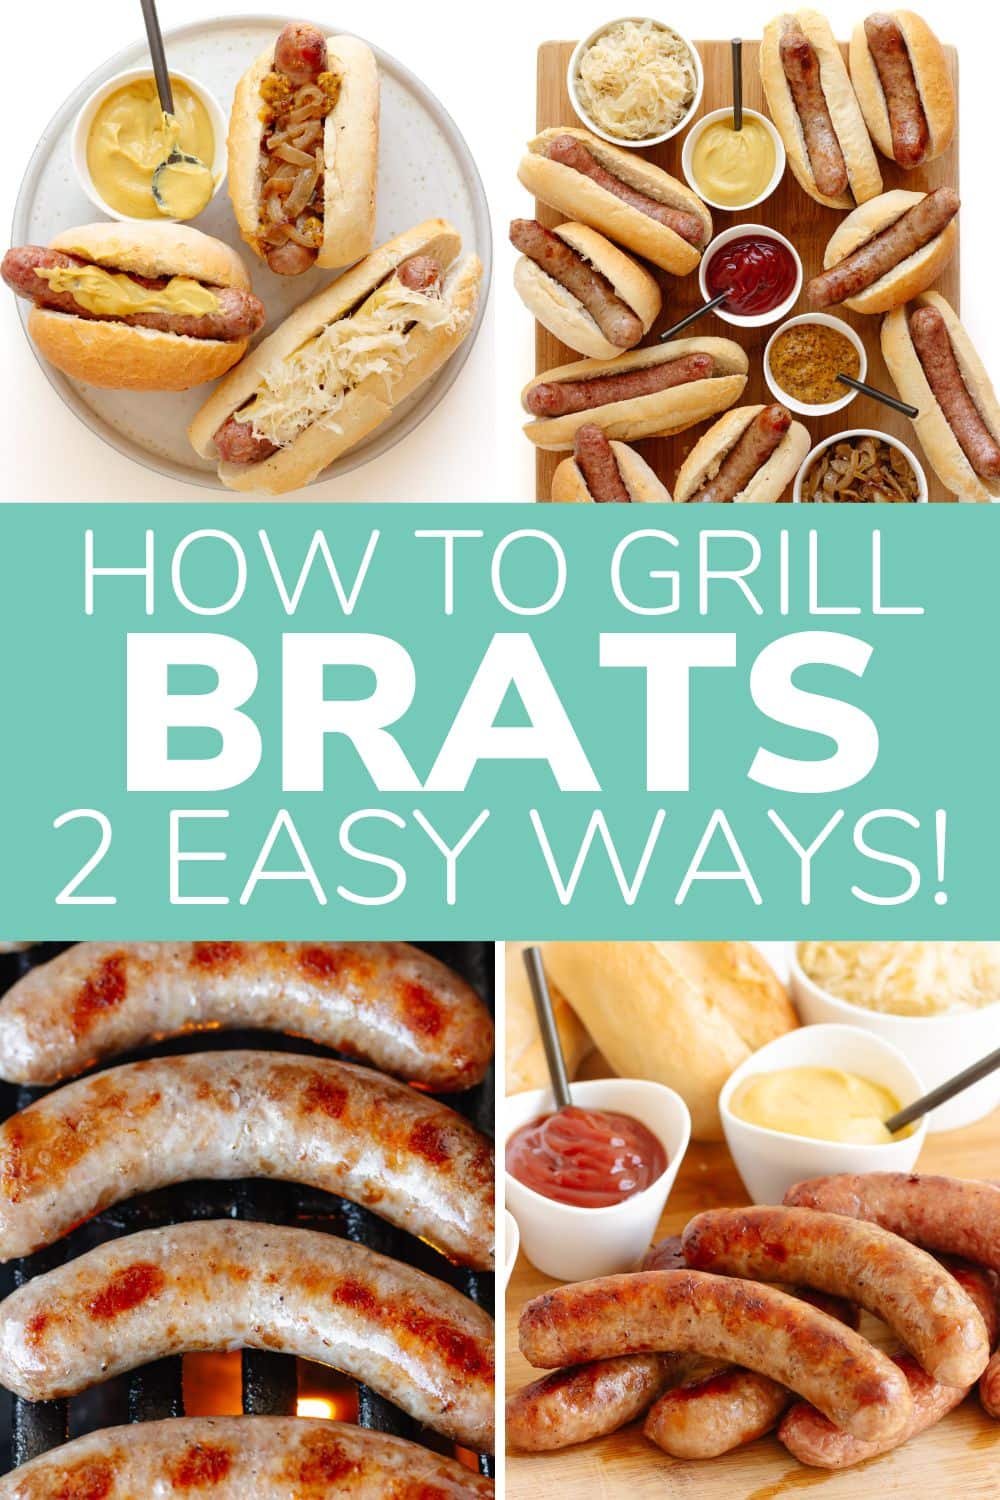 Photo collage graphic of various bratwurst pictures and a text overlay that reads "How To Grill Brats 2 Easy Ways!".